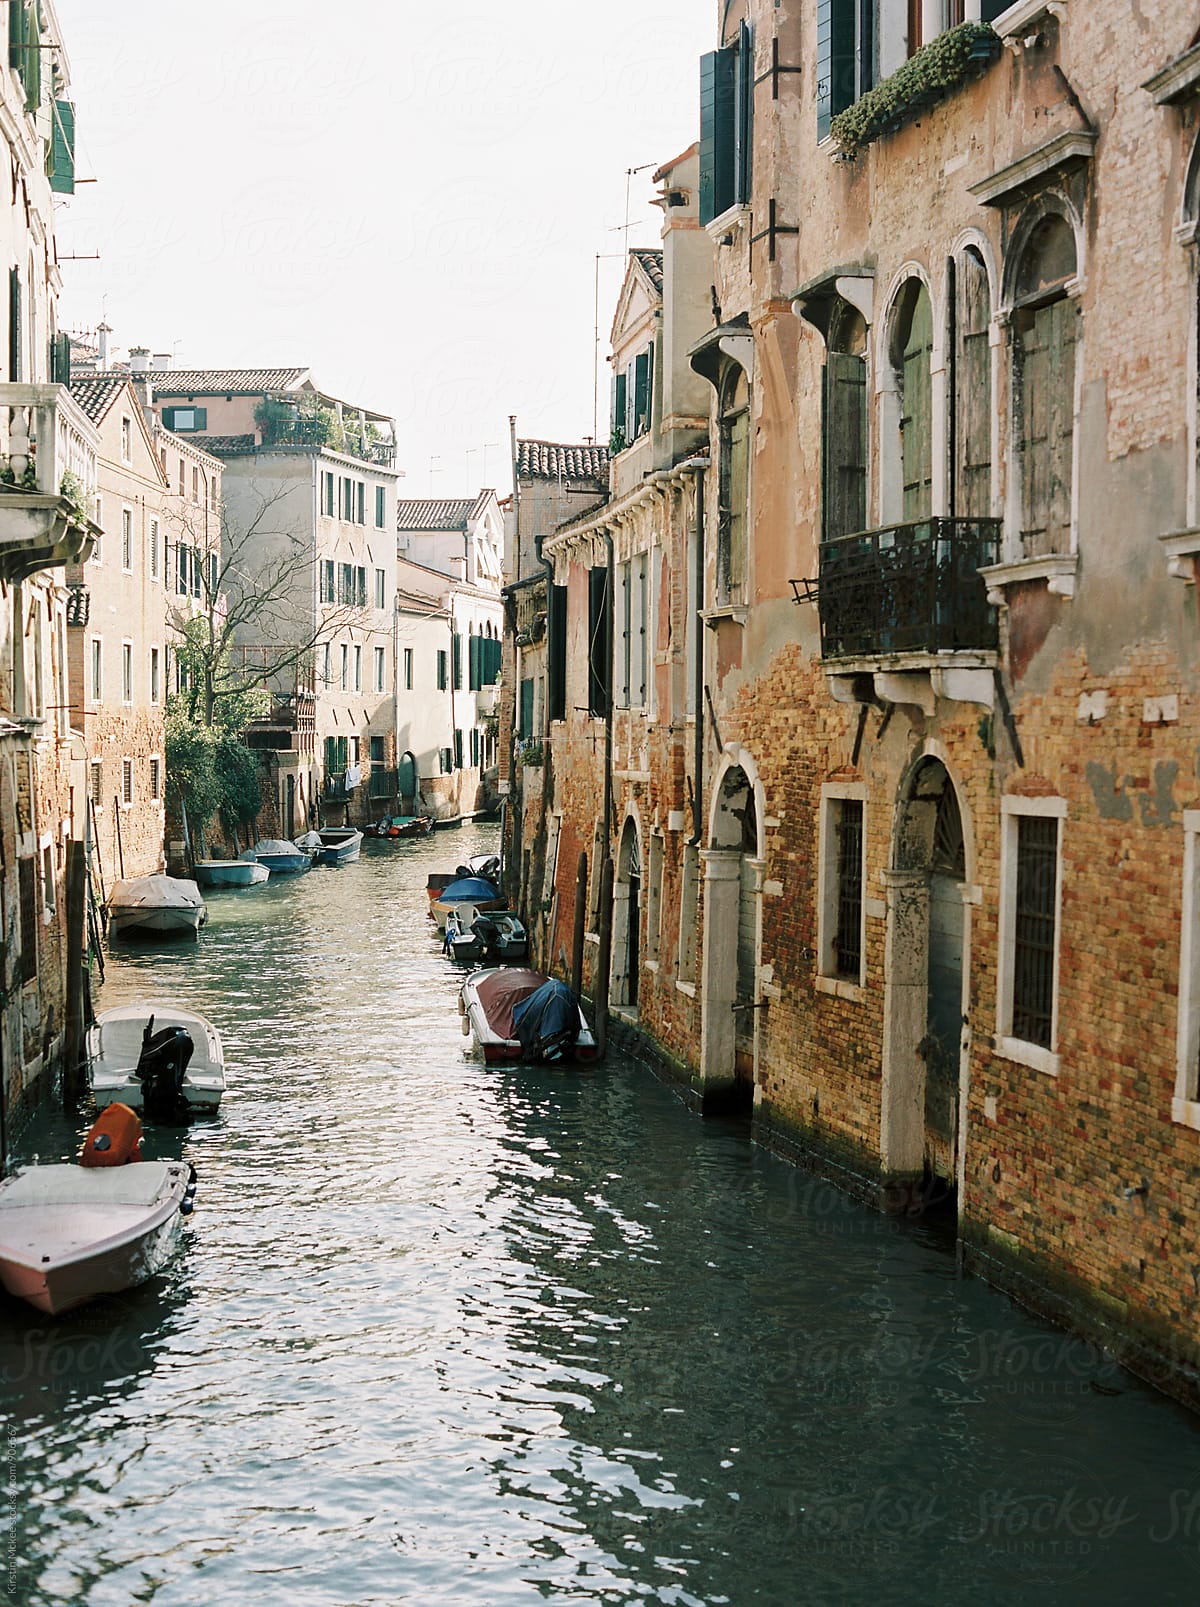 Looking down a canal from a bridge in Venice